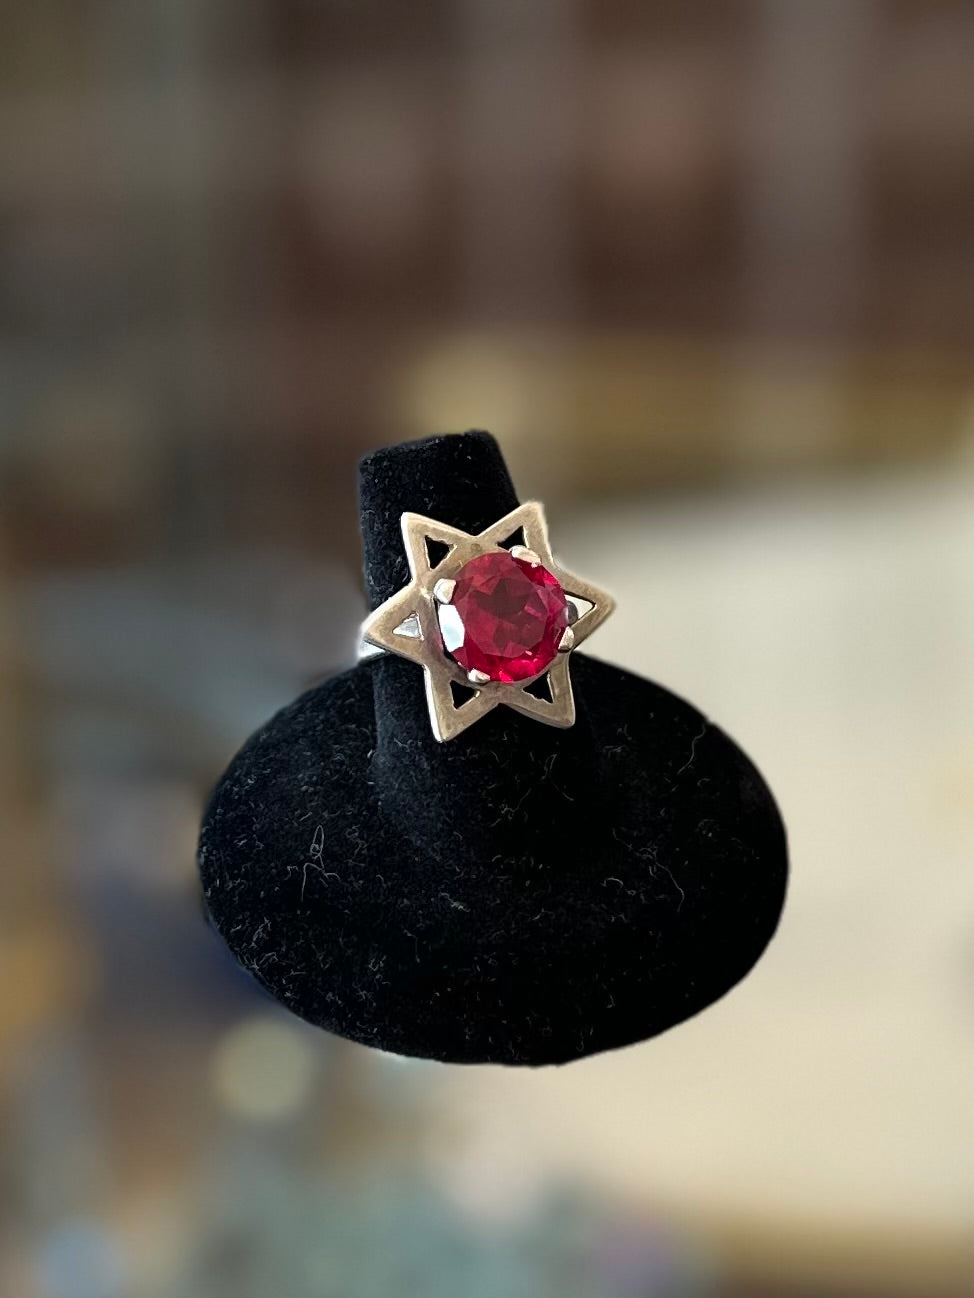 Vintage Modernist Sterling Silver MLV Mexico Star of David Ring with Red Glass Faceted Stone Center US Size 7.5